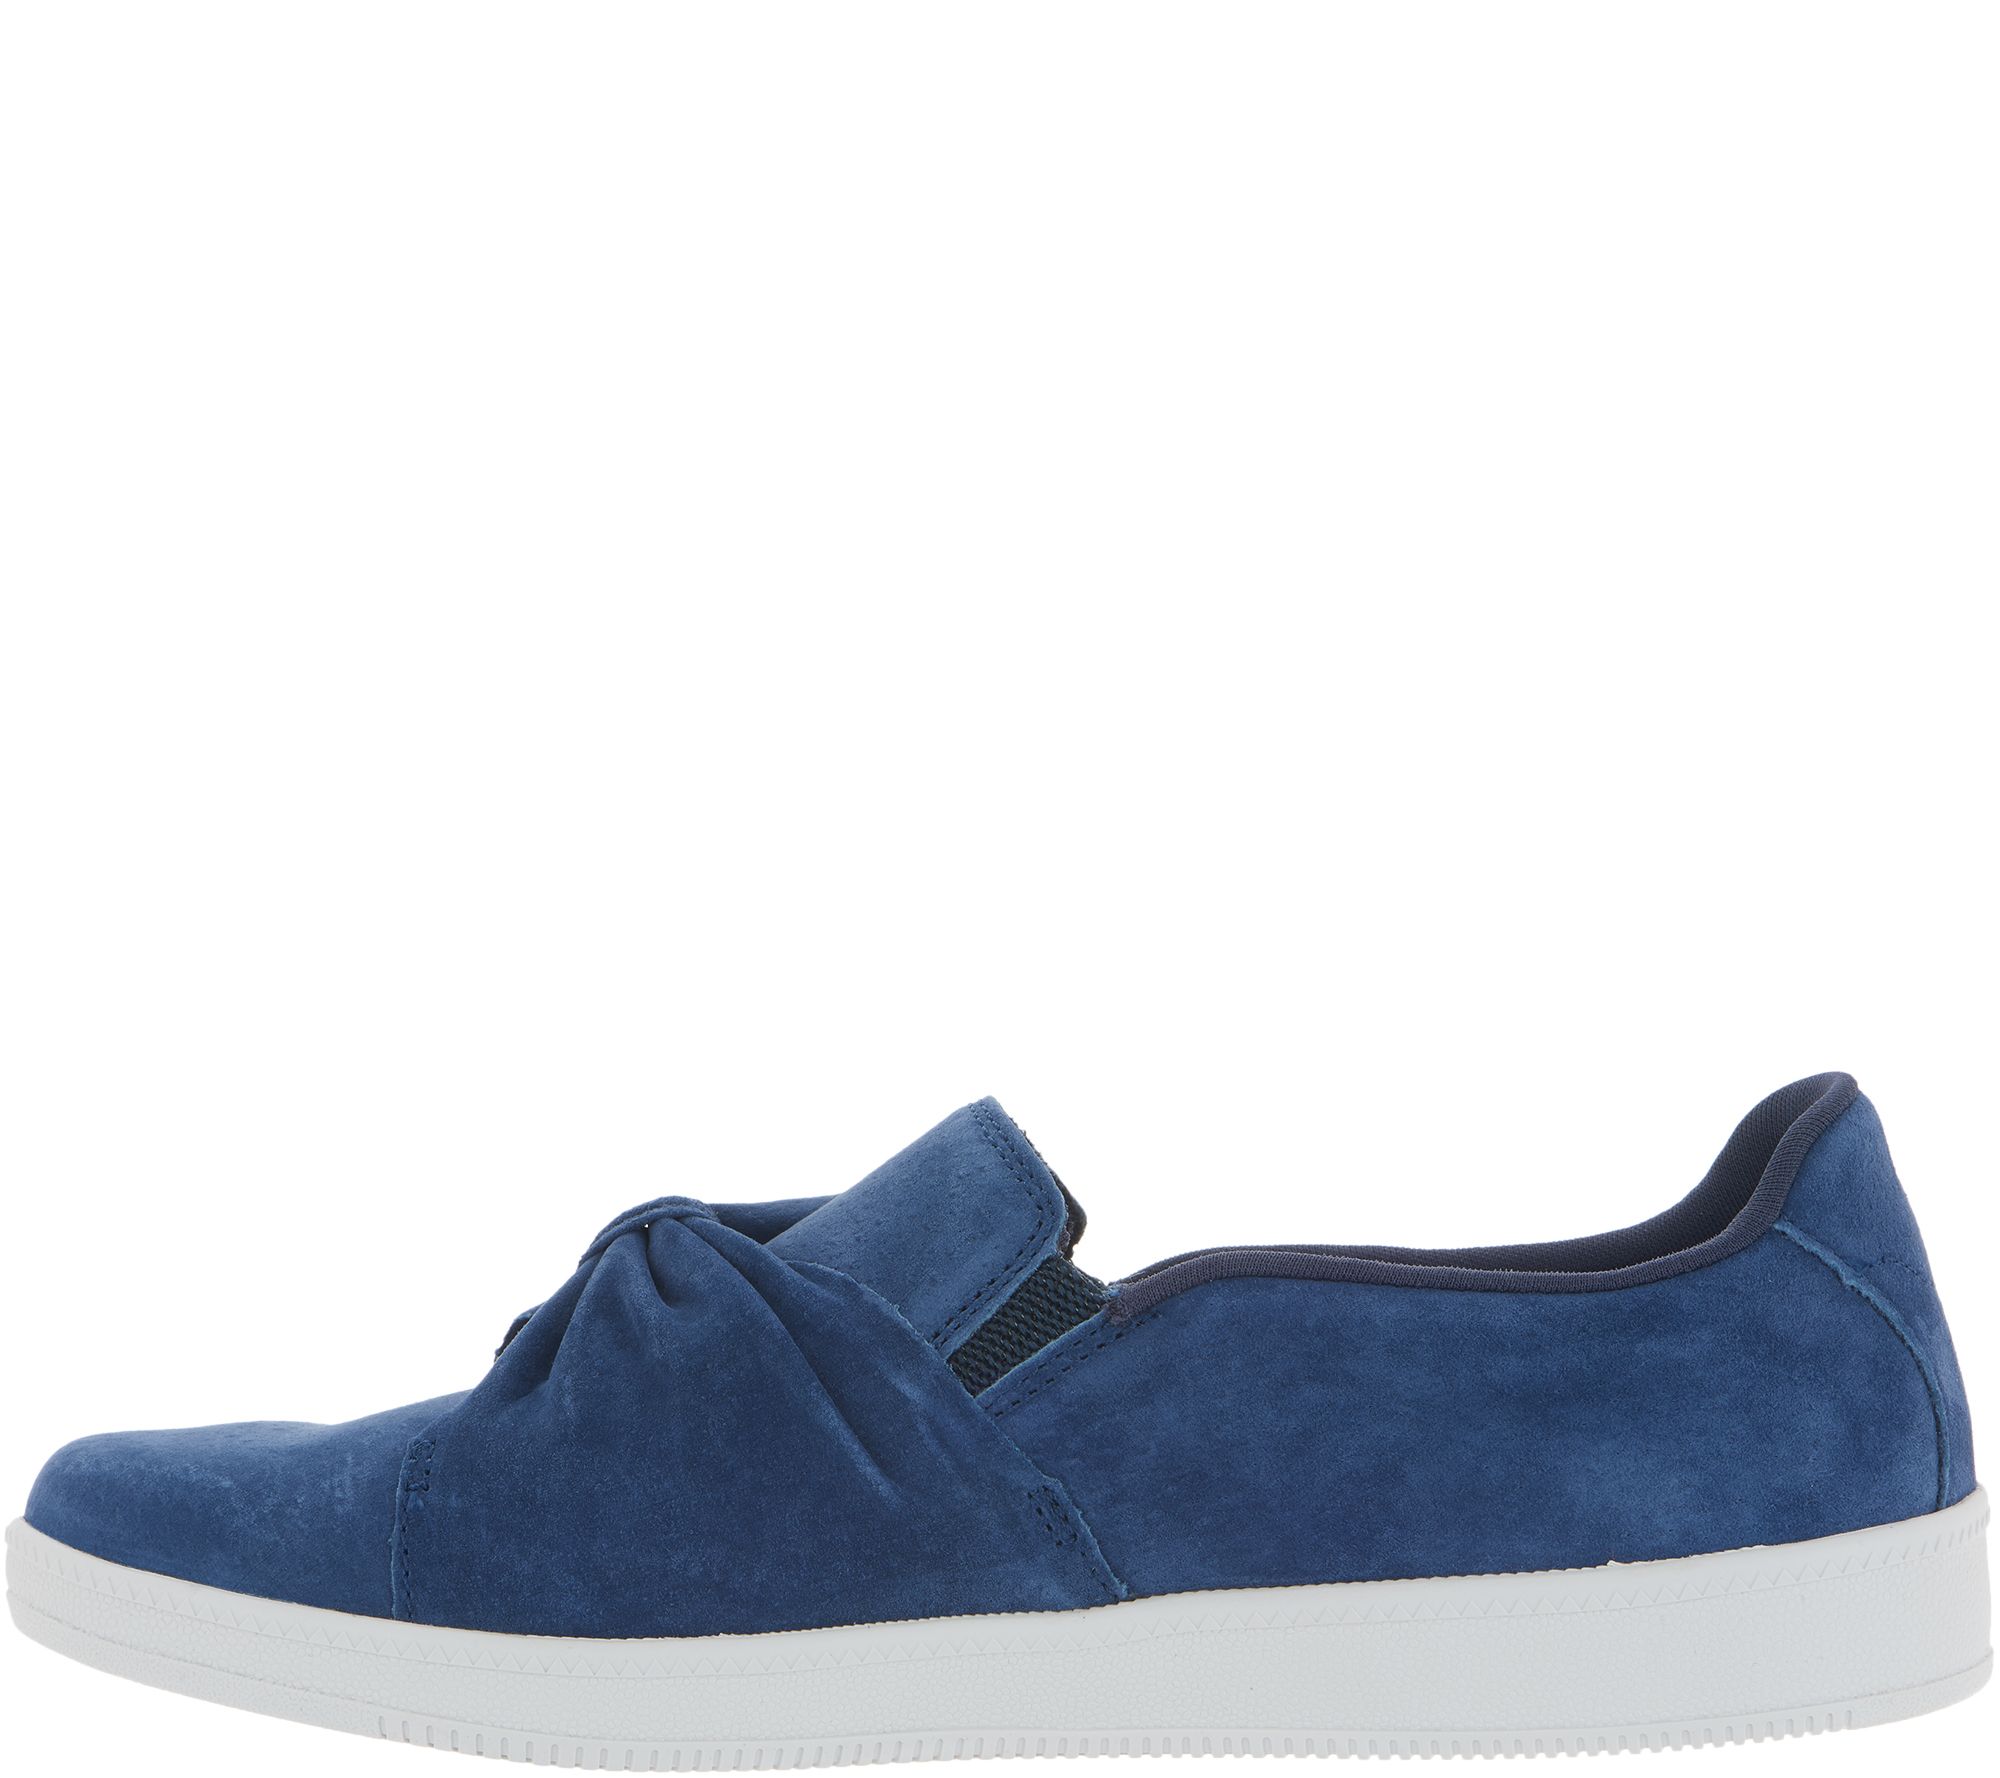 Skechers Suede Bow Slip On Shoes 